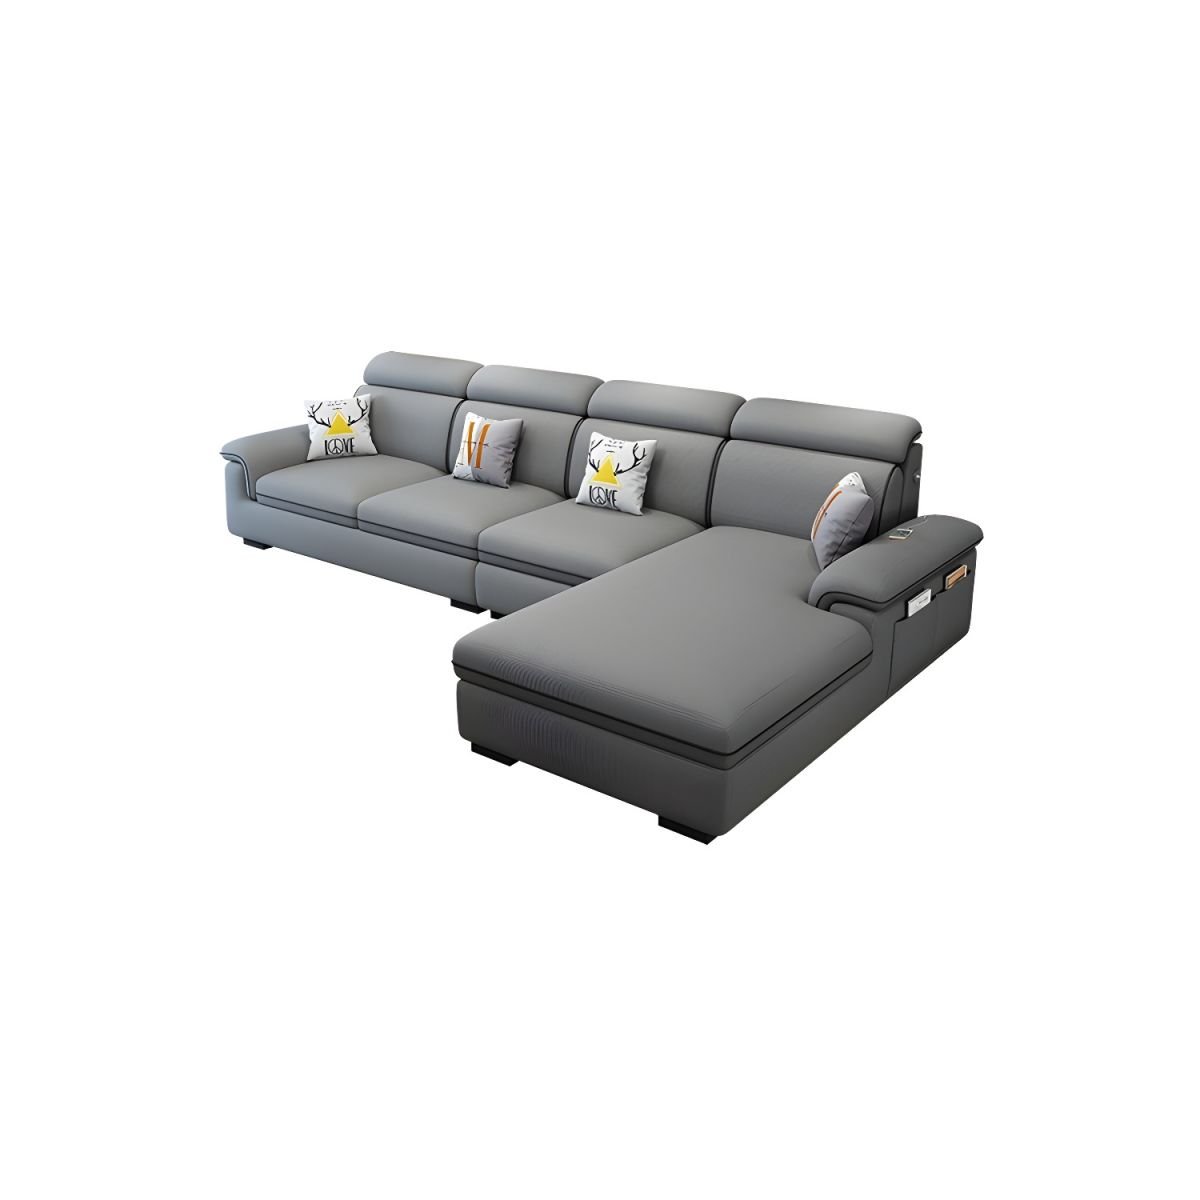 Wooden Modern 9 Feet L-Shape Sectionals No Distressing Seats 4 Storage Included Sofa Chaise - Linen Grey Right